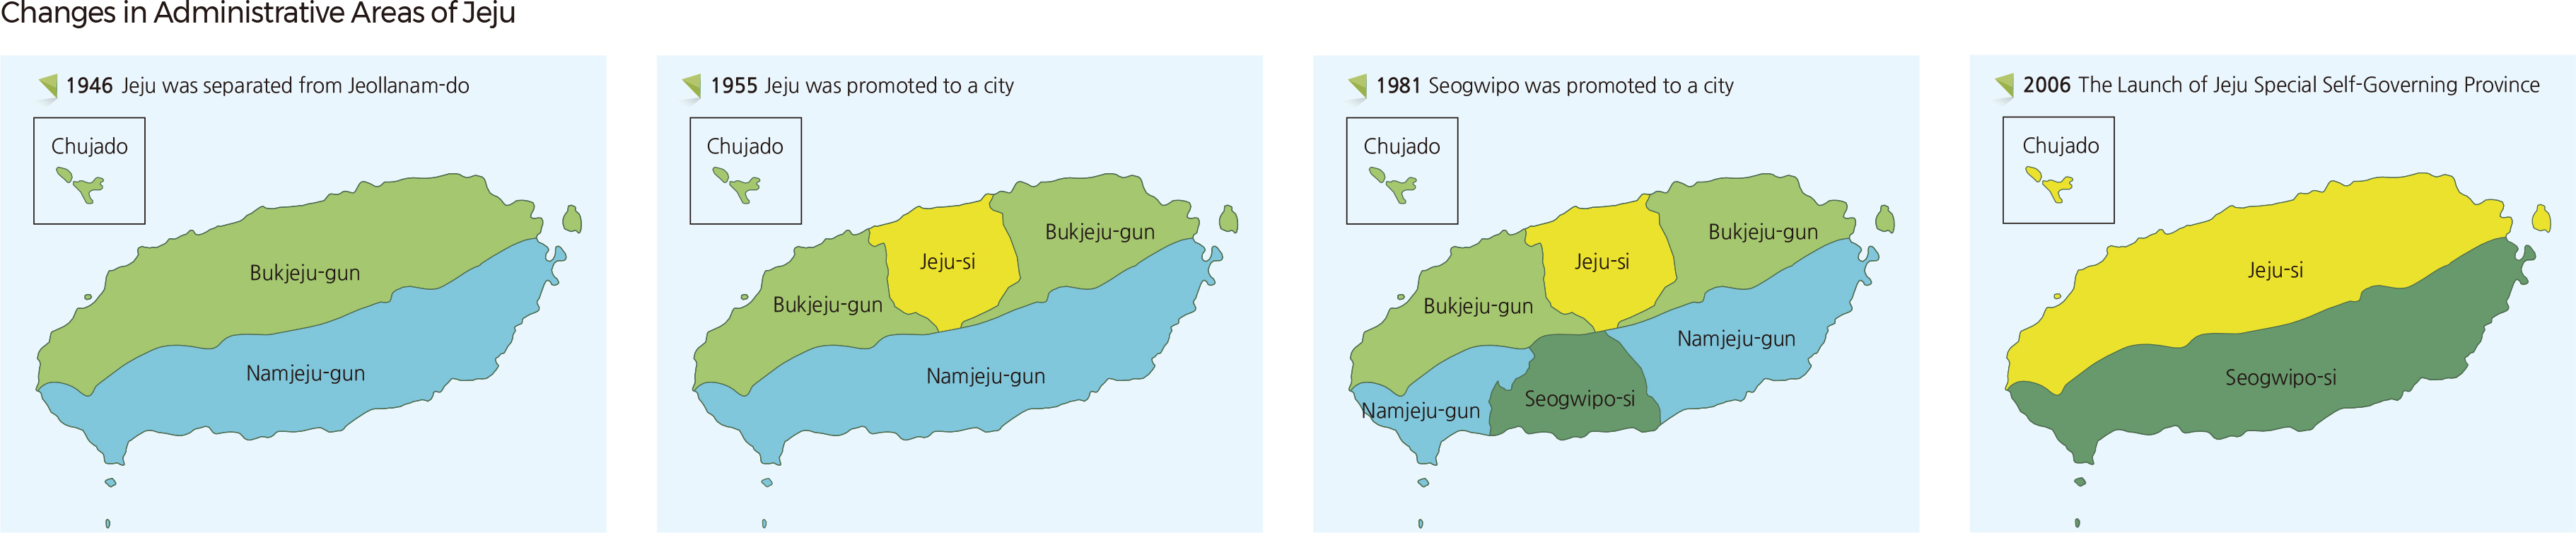 Changes in Administrative Areas of Jeju